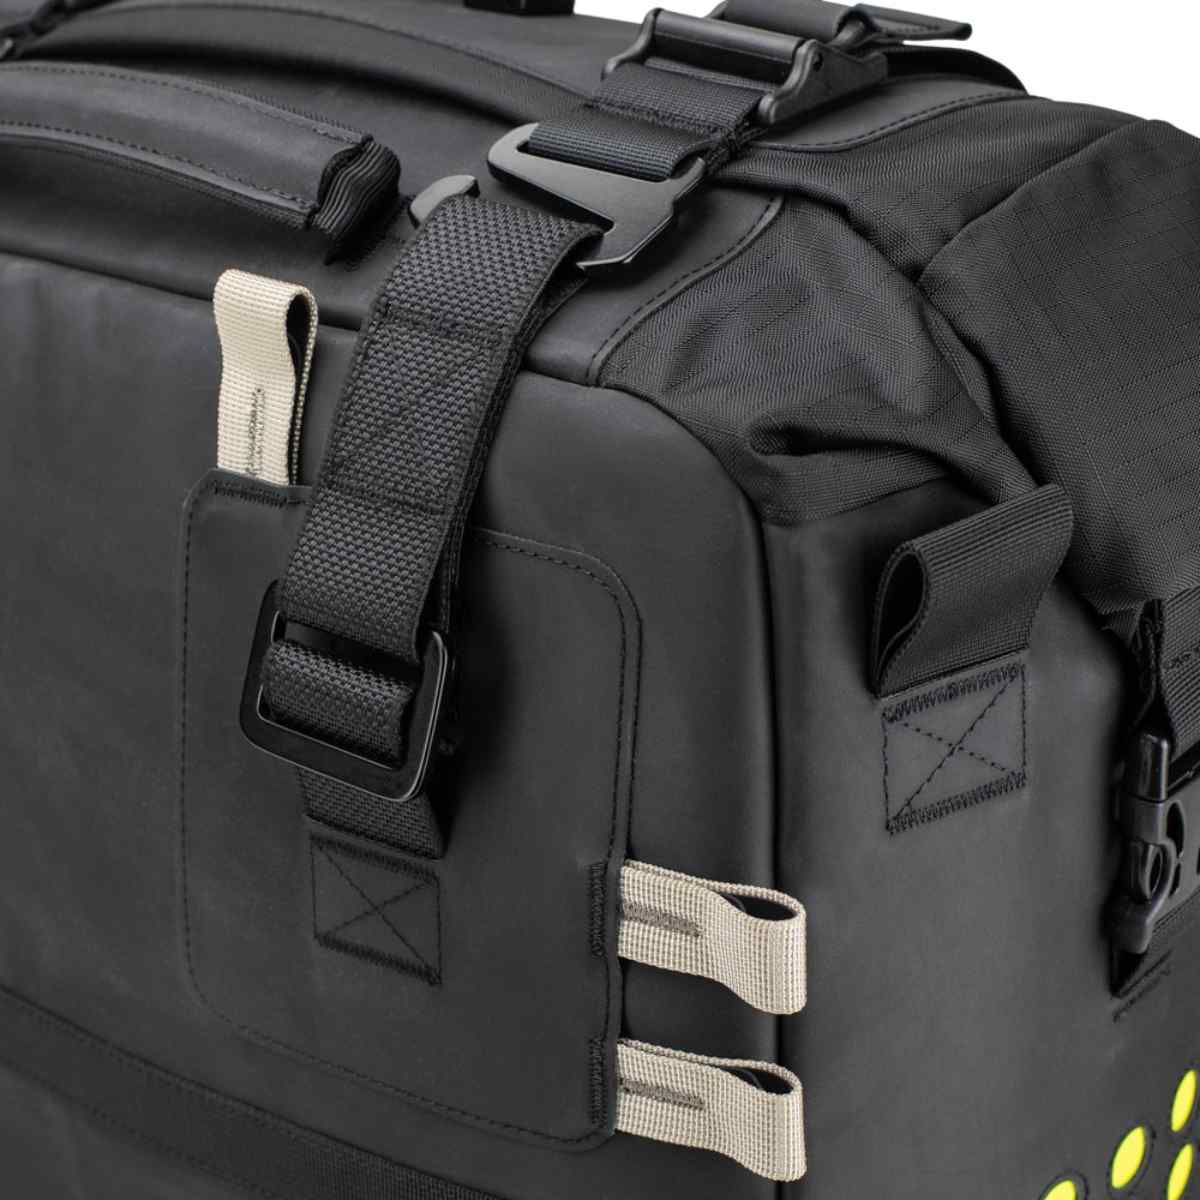 Kriega Overlander-S OS-38 Soft Pannier WP: Serious luggage for serious adventures